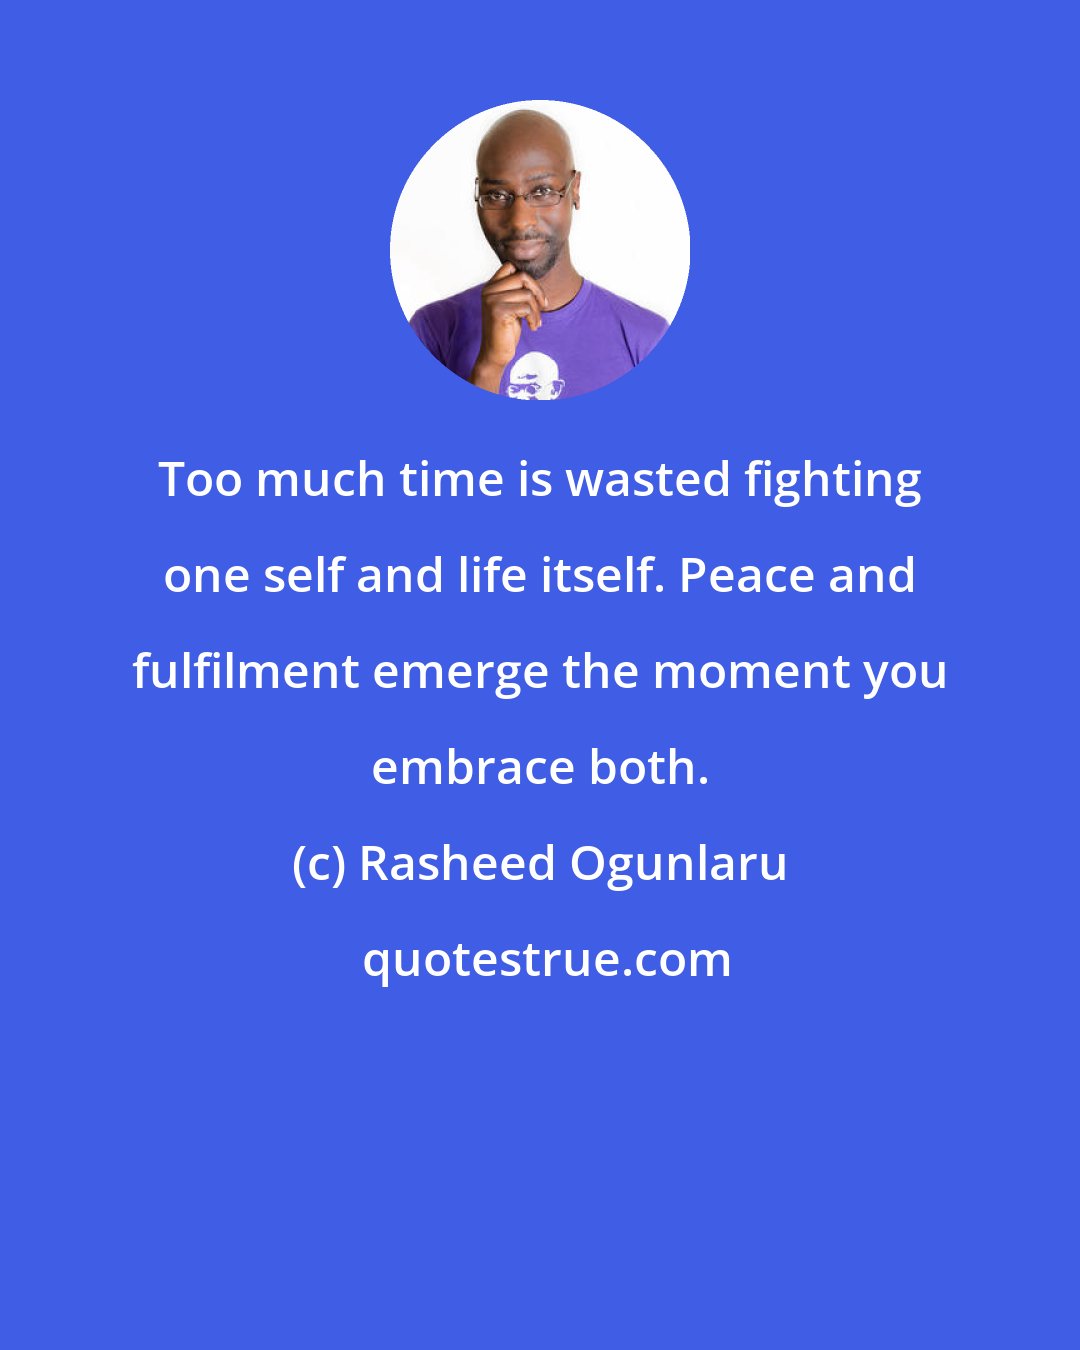 Rasheed Ogunlaru: Too much time is wasted fighting one self and life itself. Peace and fulfilment emerge the moment you embrace both.